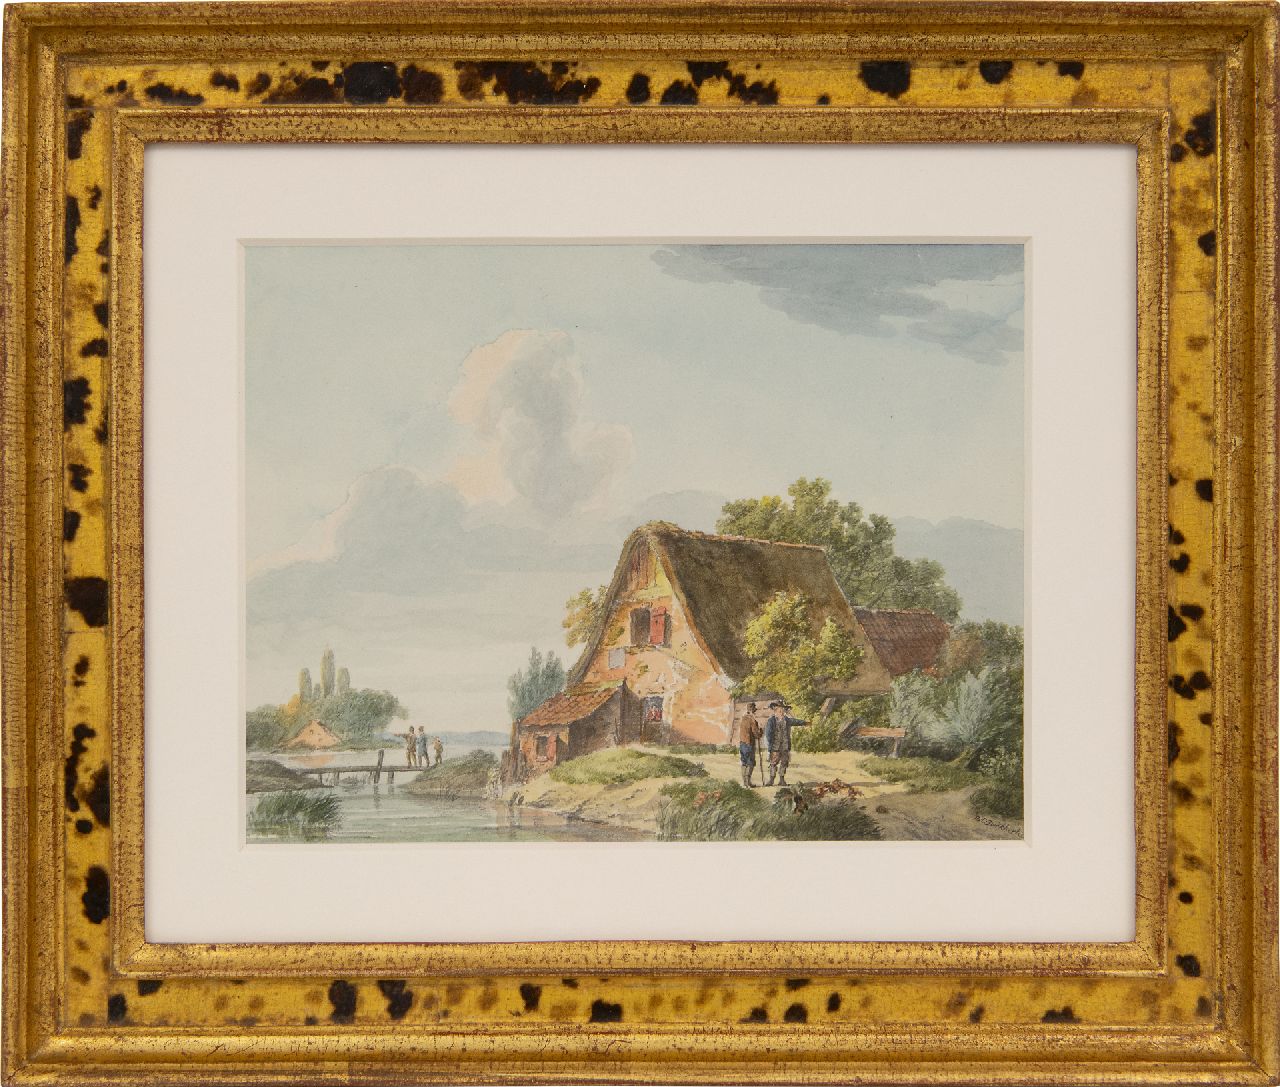 Koekkoek B.C.  | Barend Cornelis Koekkoek | Watercolours and drawings offered for sale | Travellers near a cottage by the river, watercolour on paper 14.7 x 19.4 cm, signed l.r.